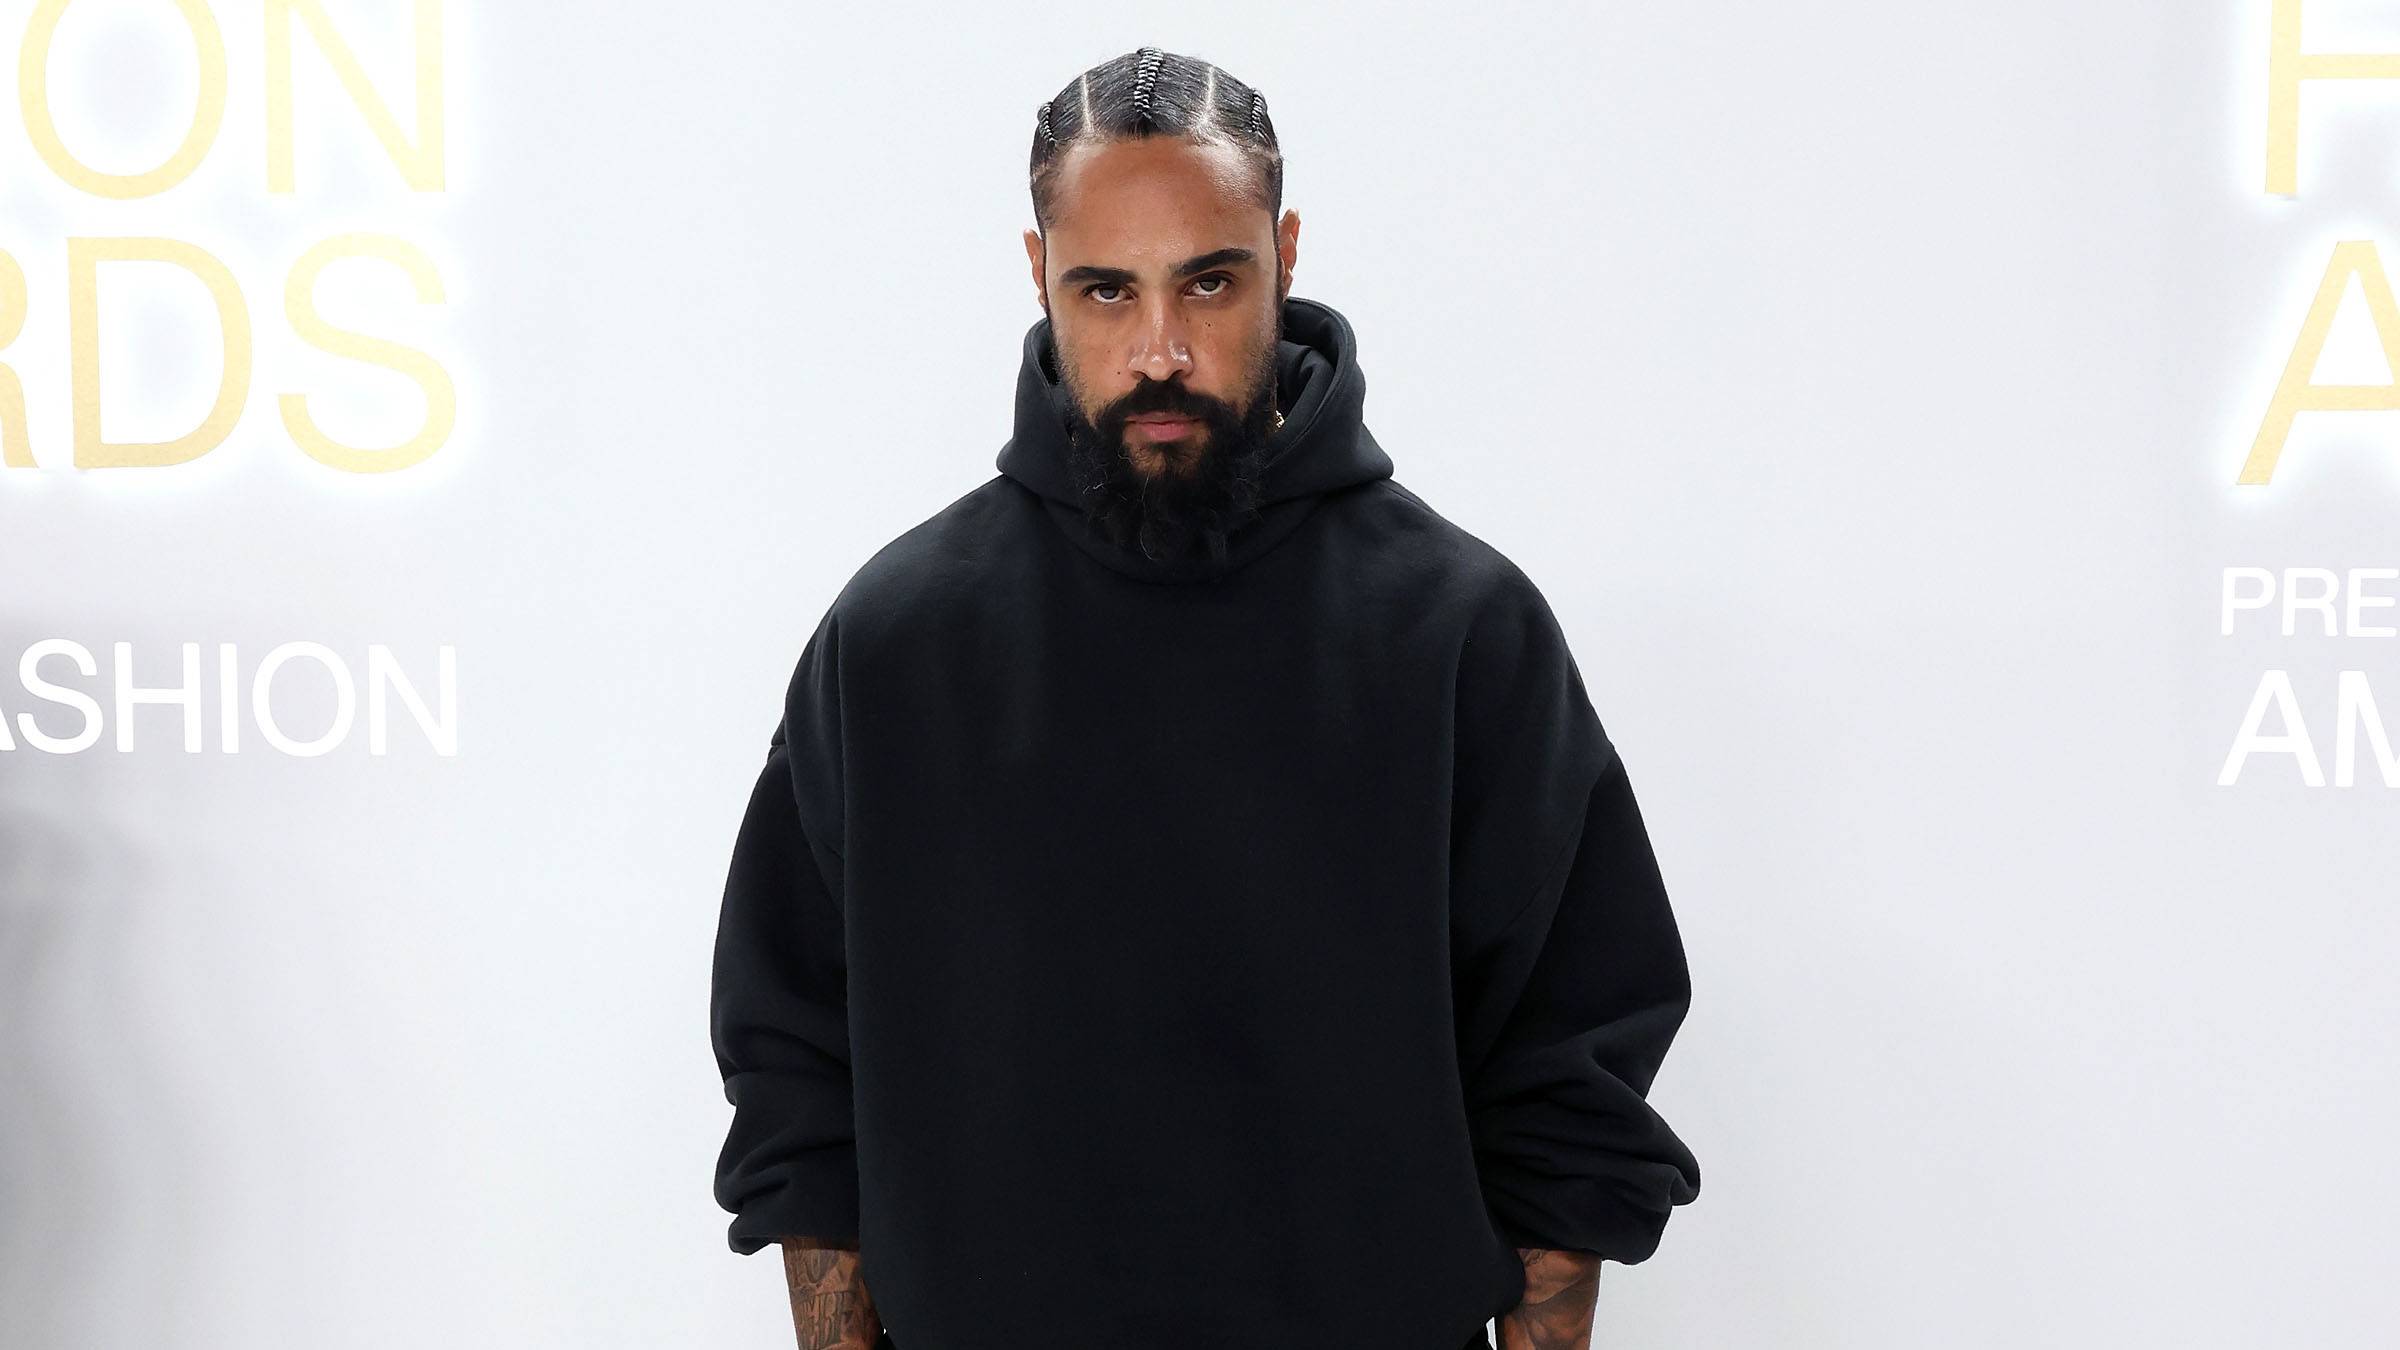 With His Latest Essentials Drop, Jerry Lorenzo Is Looking to